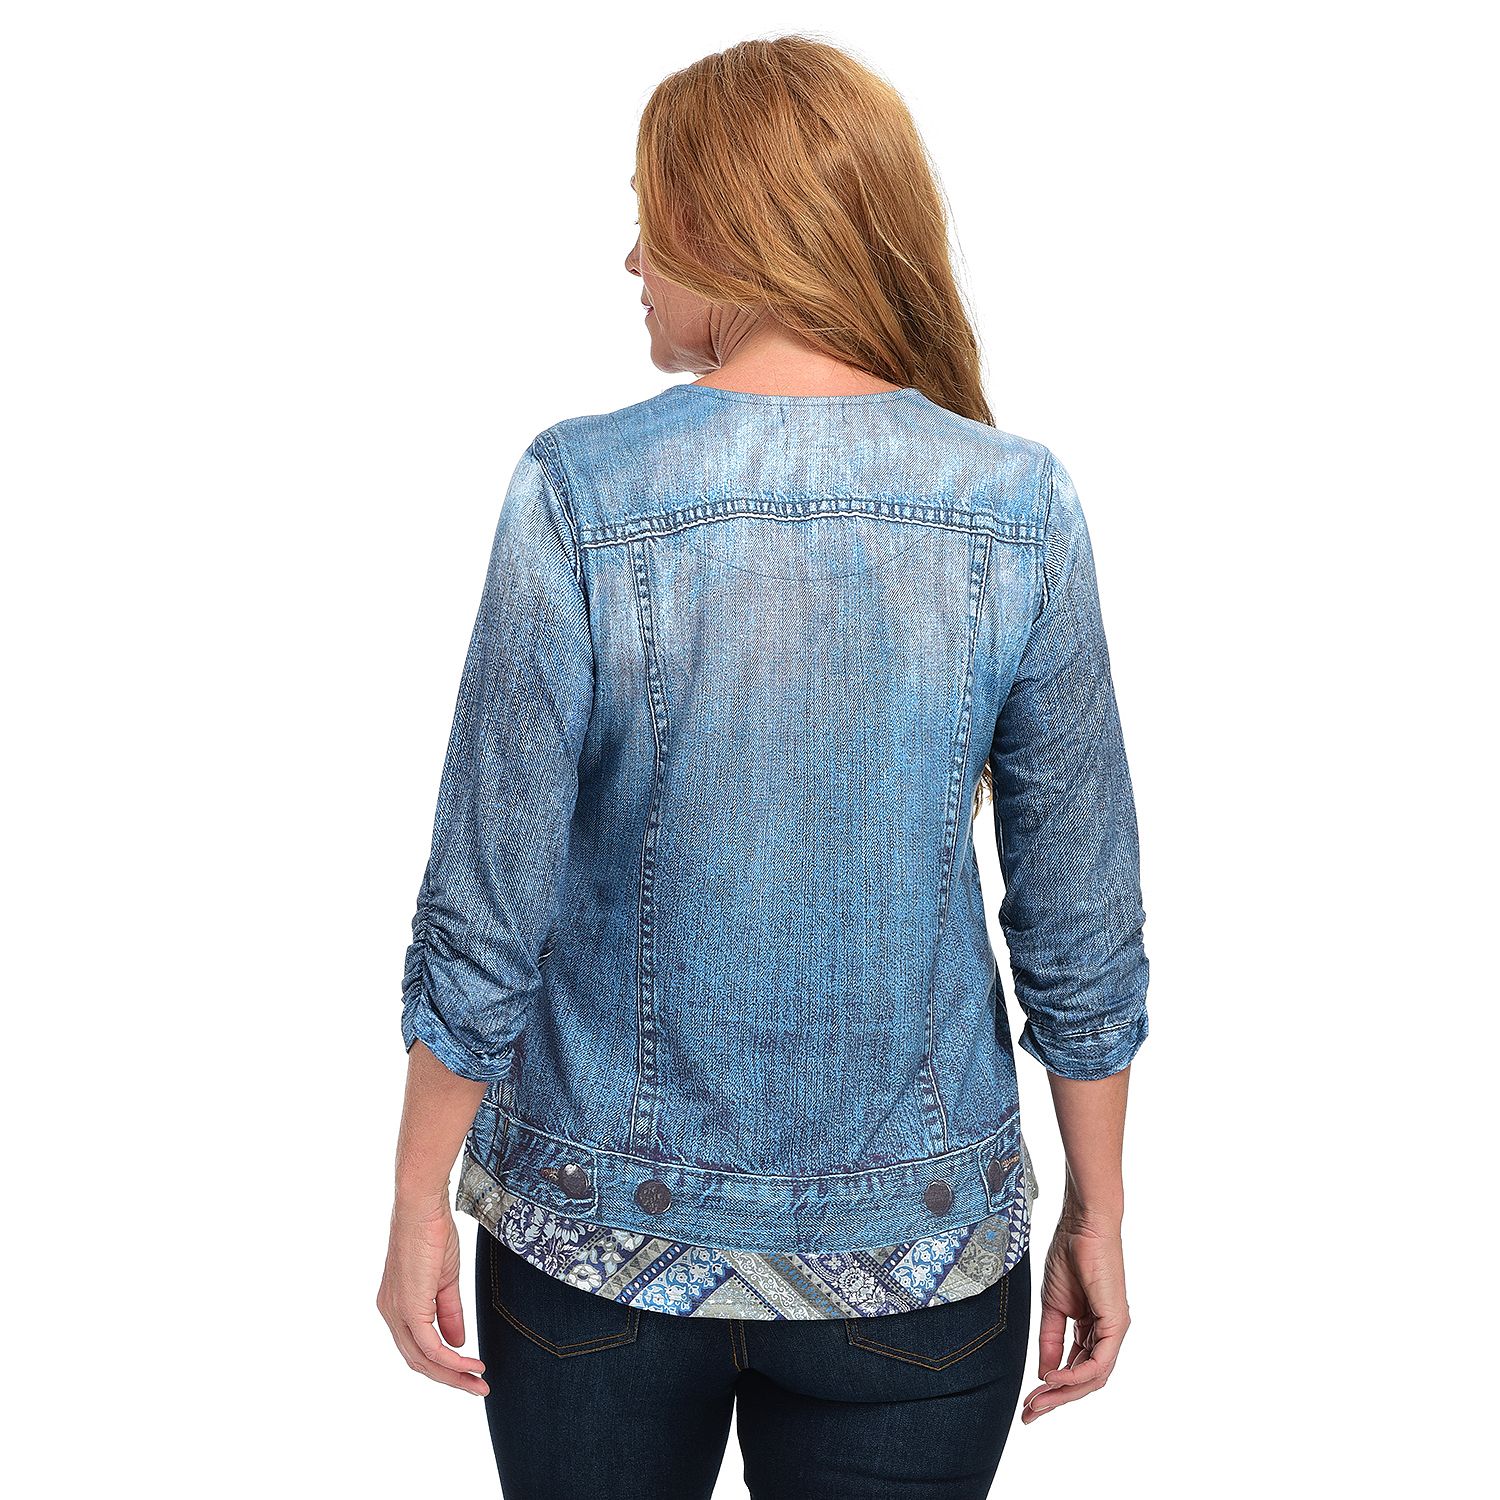 (ShopHQ) One World Stretch Knit Faux Jean Jacket Scoop Neck Top ...